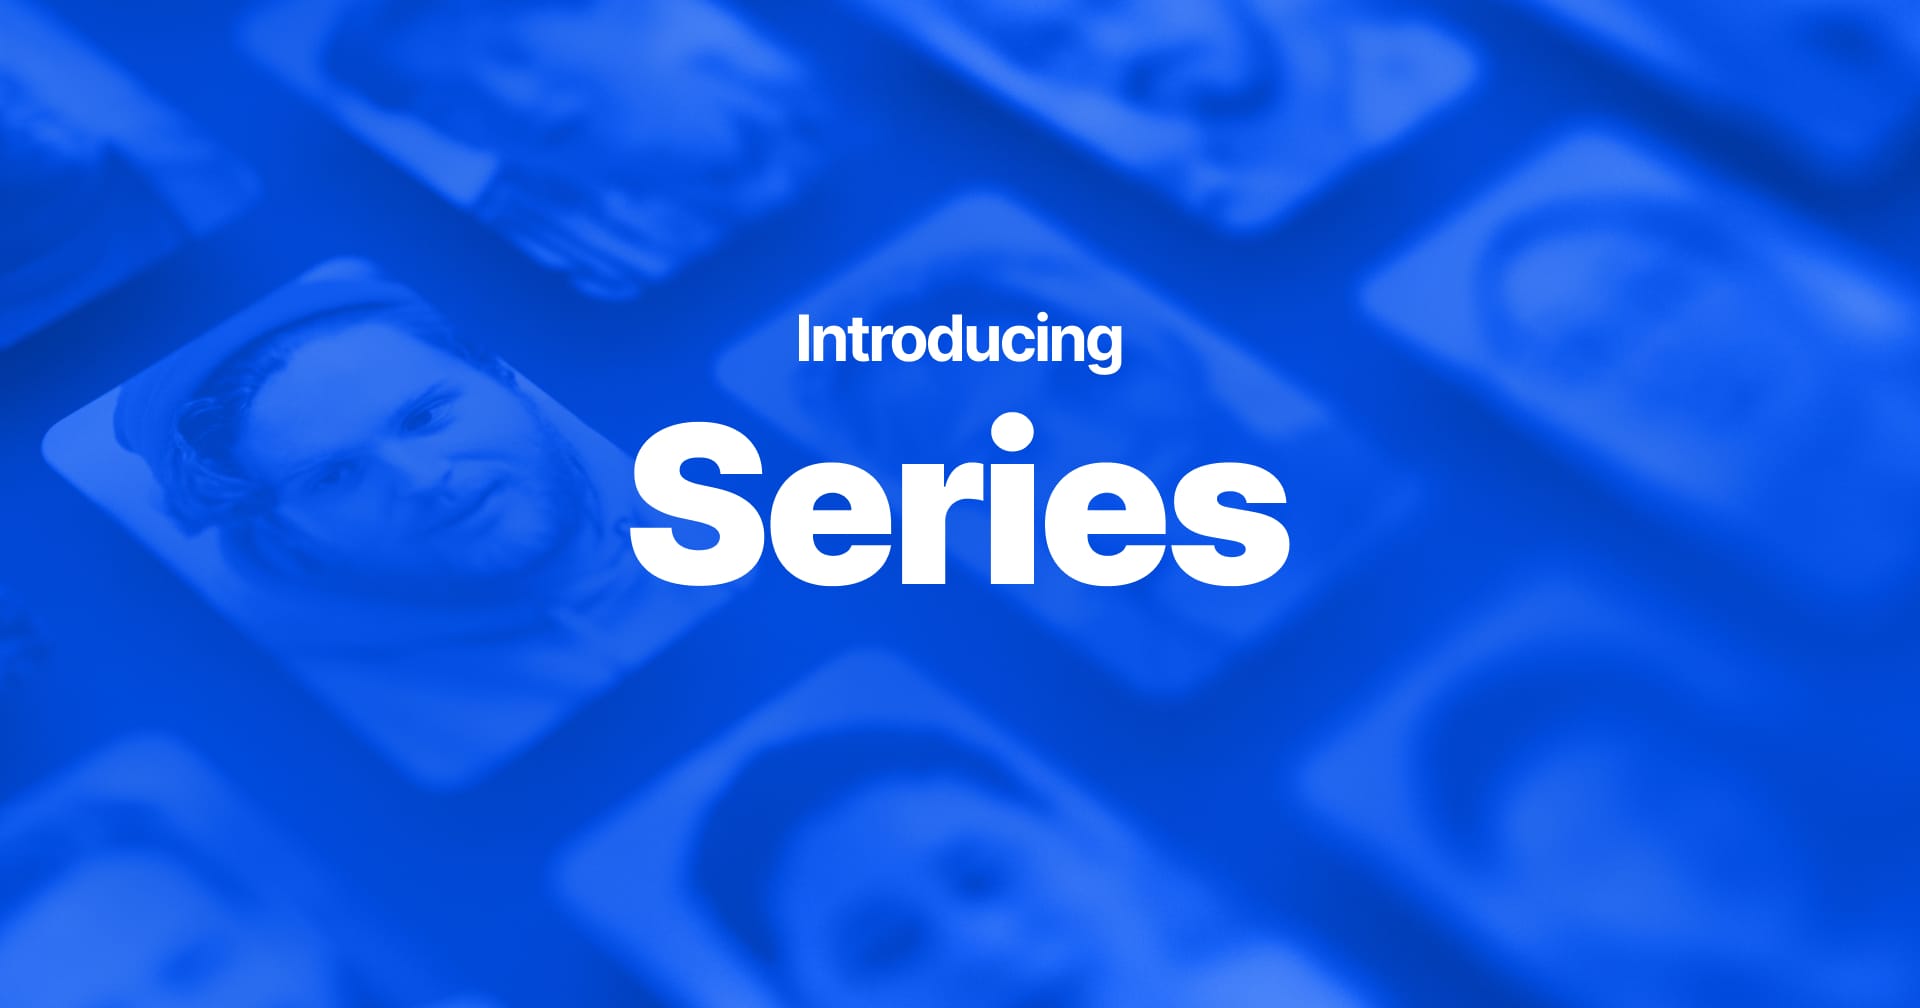 rectangular cards with various faces on them shown at an angled perspective with a bright blue background and Introducing Series written in a sans-serif font centered above them